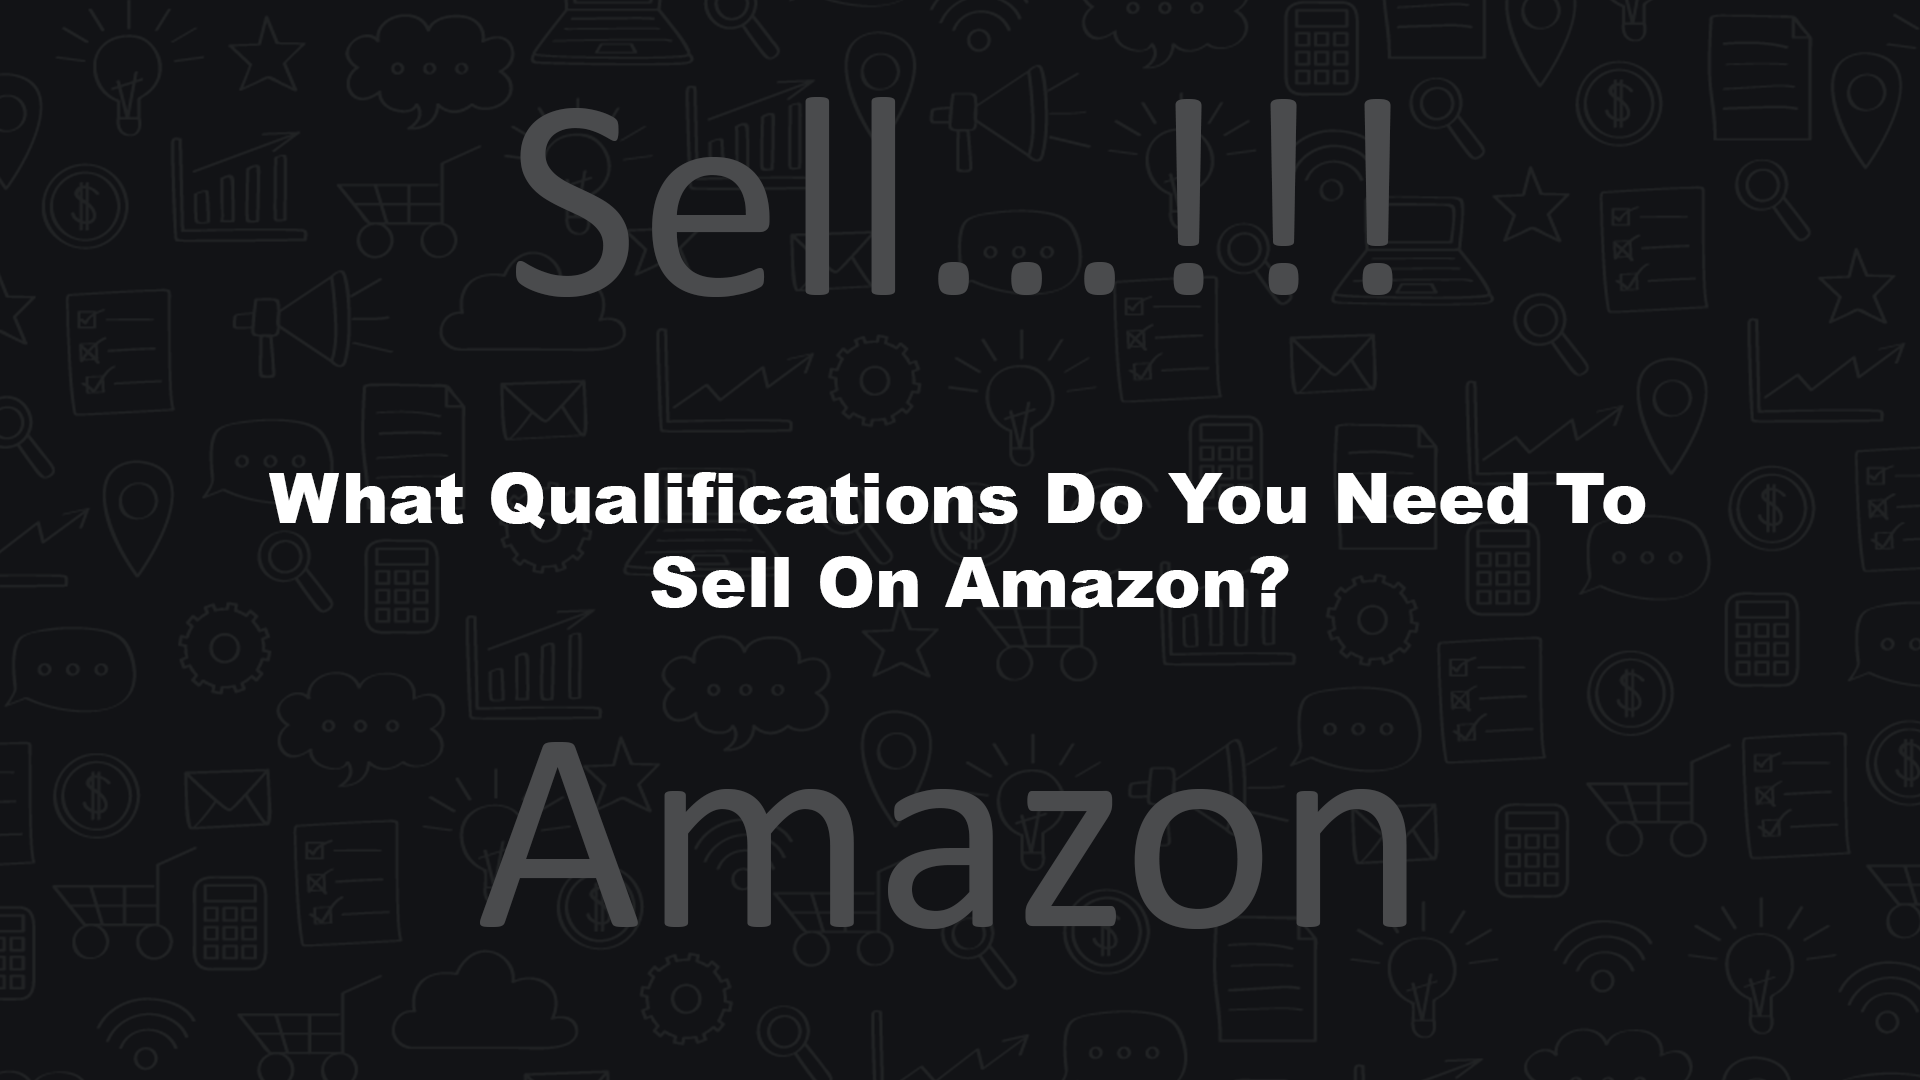 What Qualifications Do You Need To Sell On Amazon